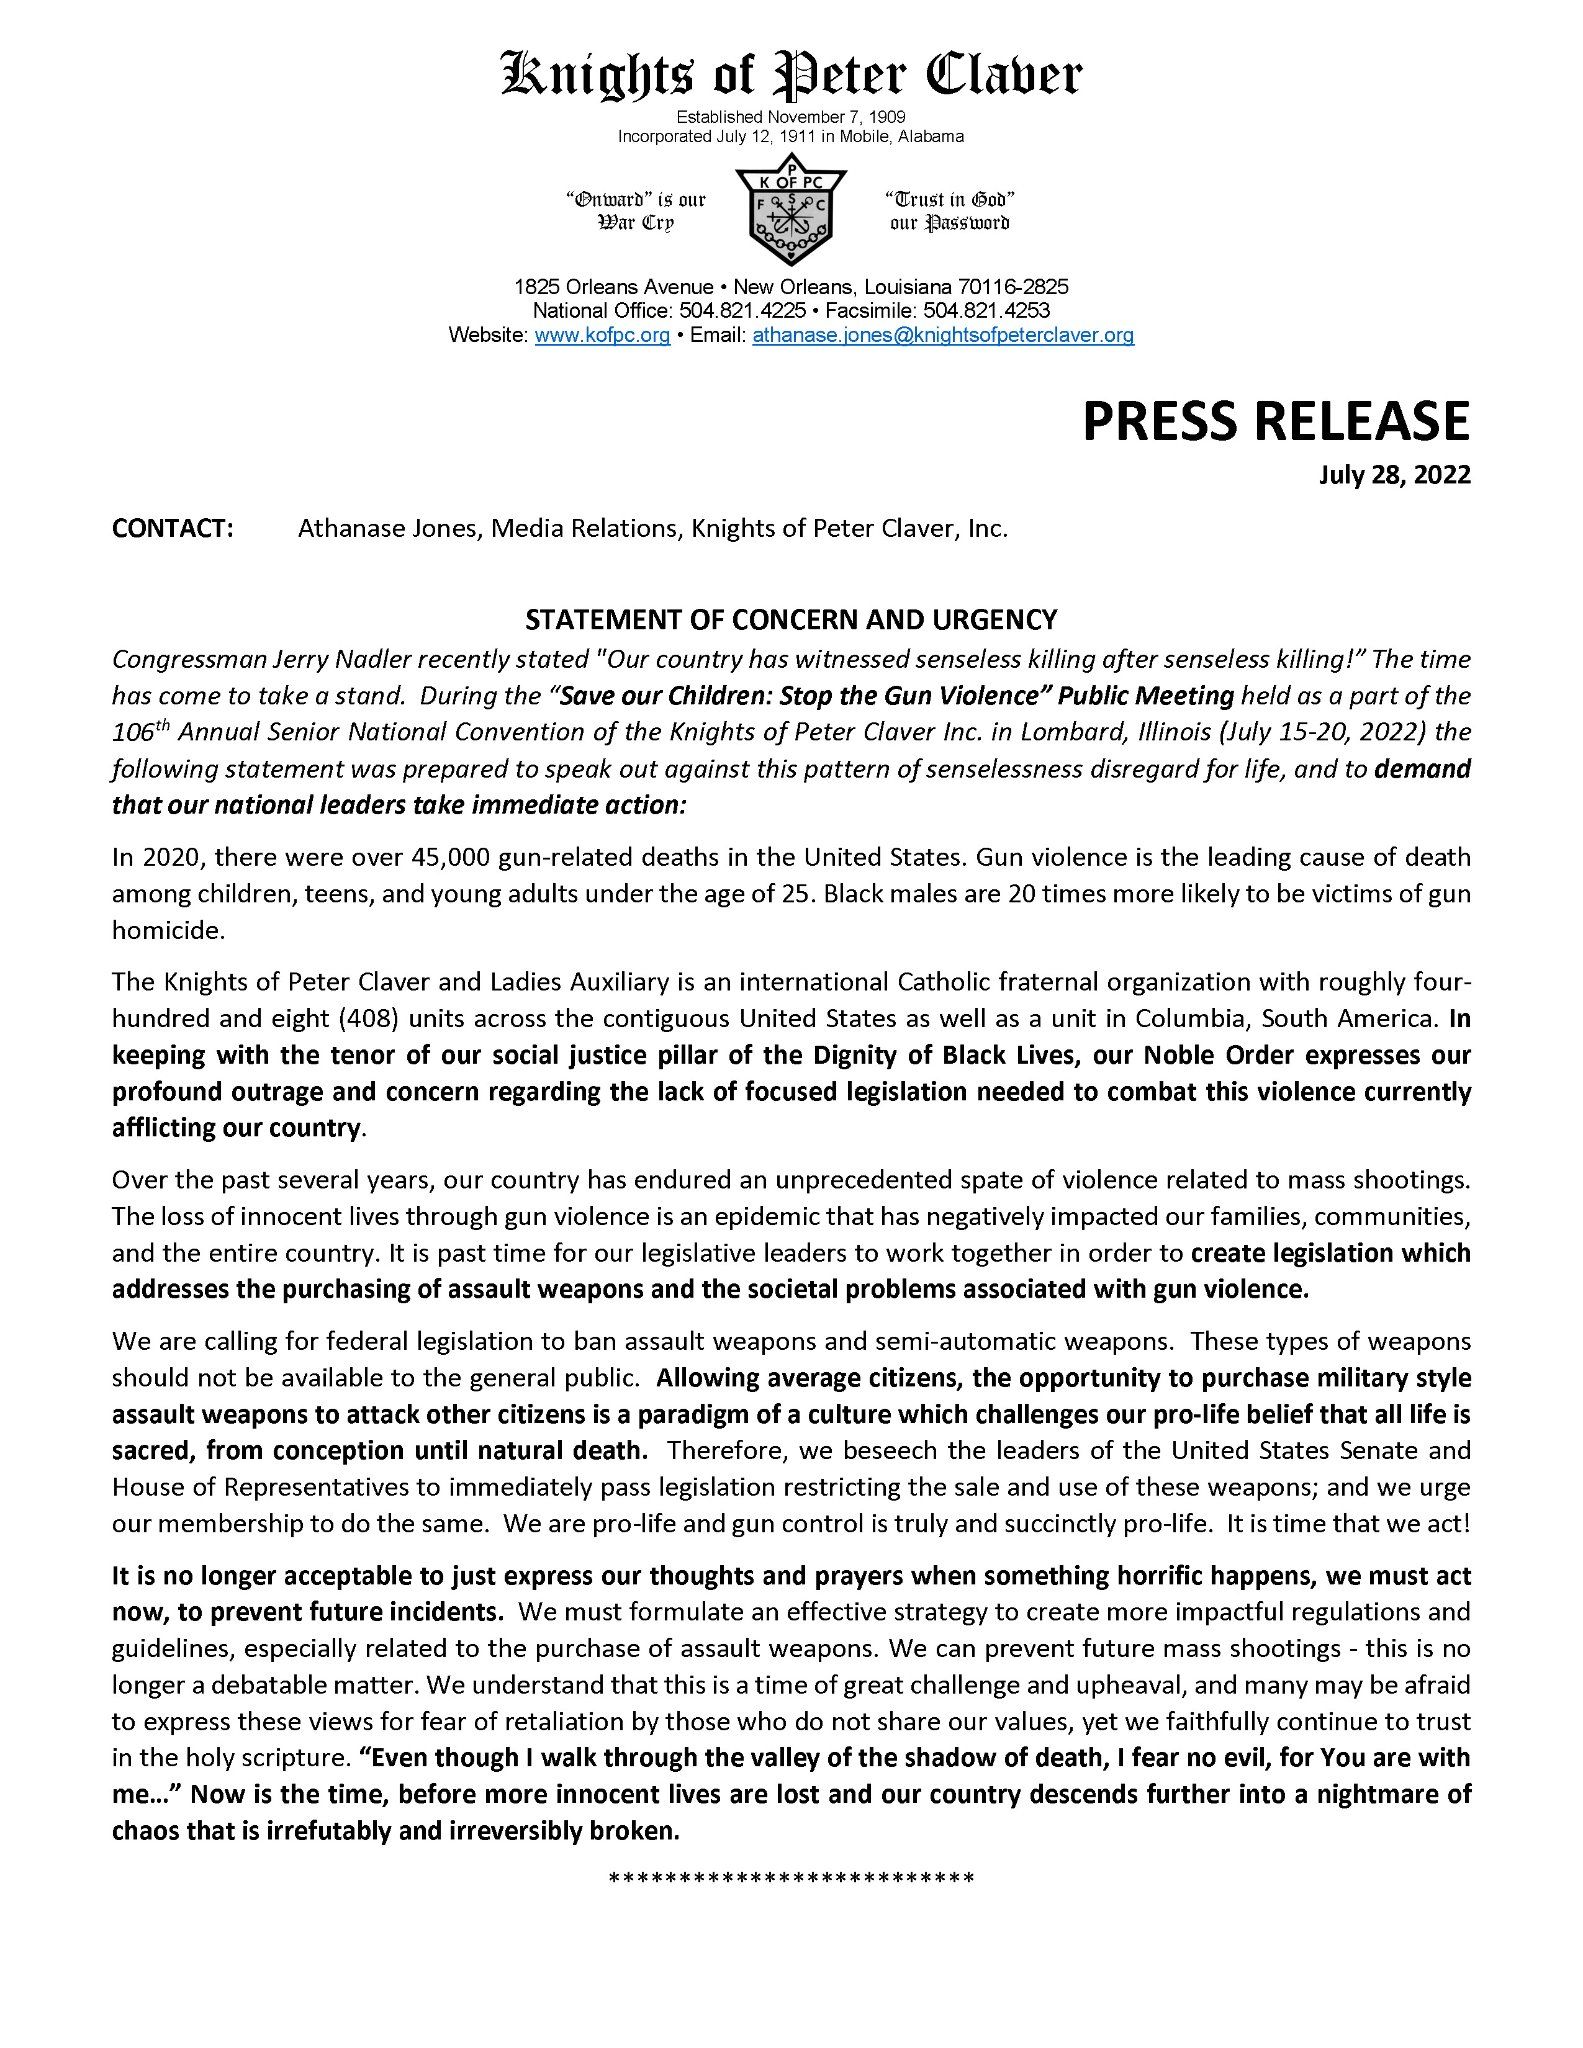 Knights of Peter Claver release statement on gun violence